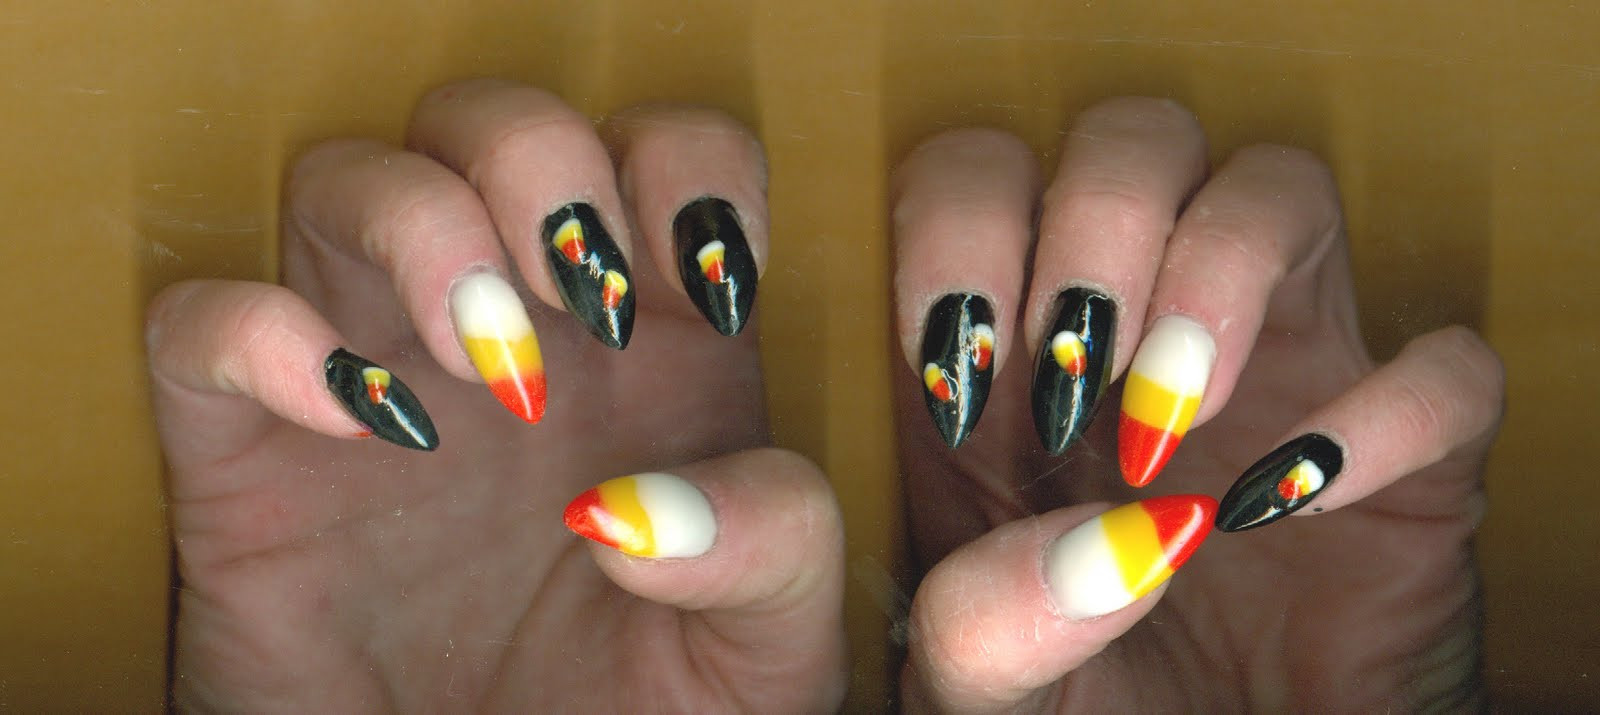 Candy Corn Nail Designs
 Make It With Me Candy Corn Nails